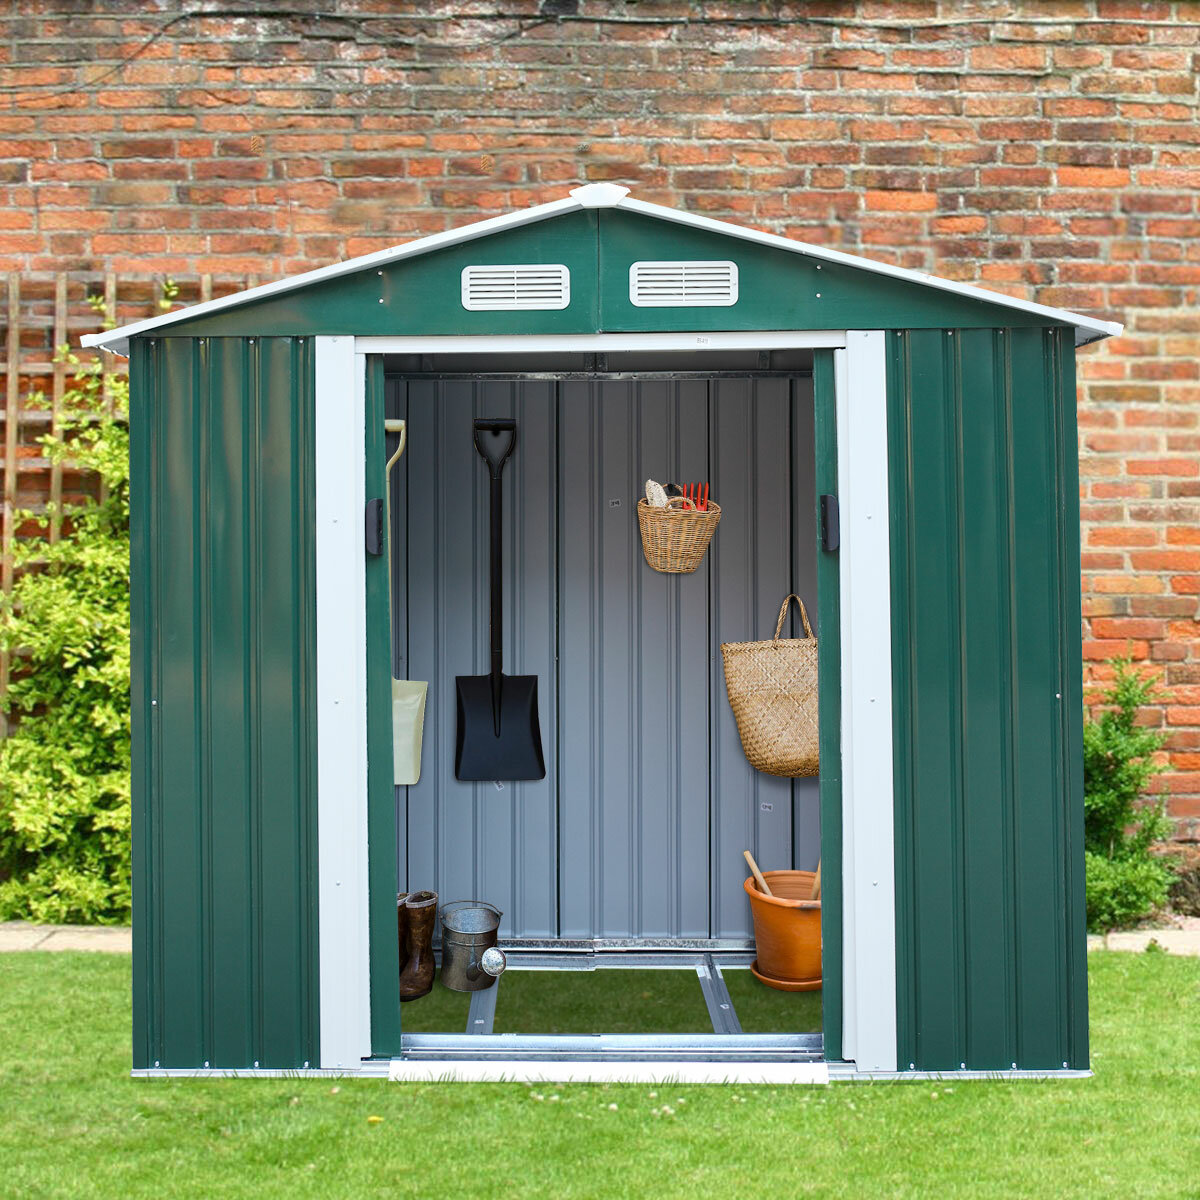 Jaxpety Outdoor 7 ft. W x 4 ft. D Metal Storage Shed & Reviews | Wayfair